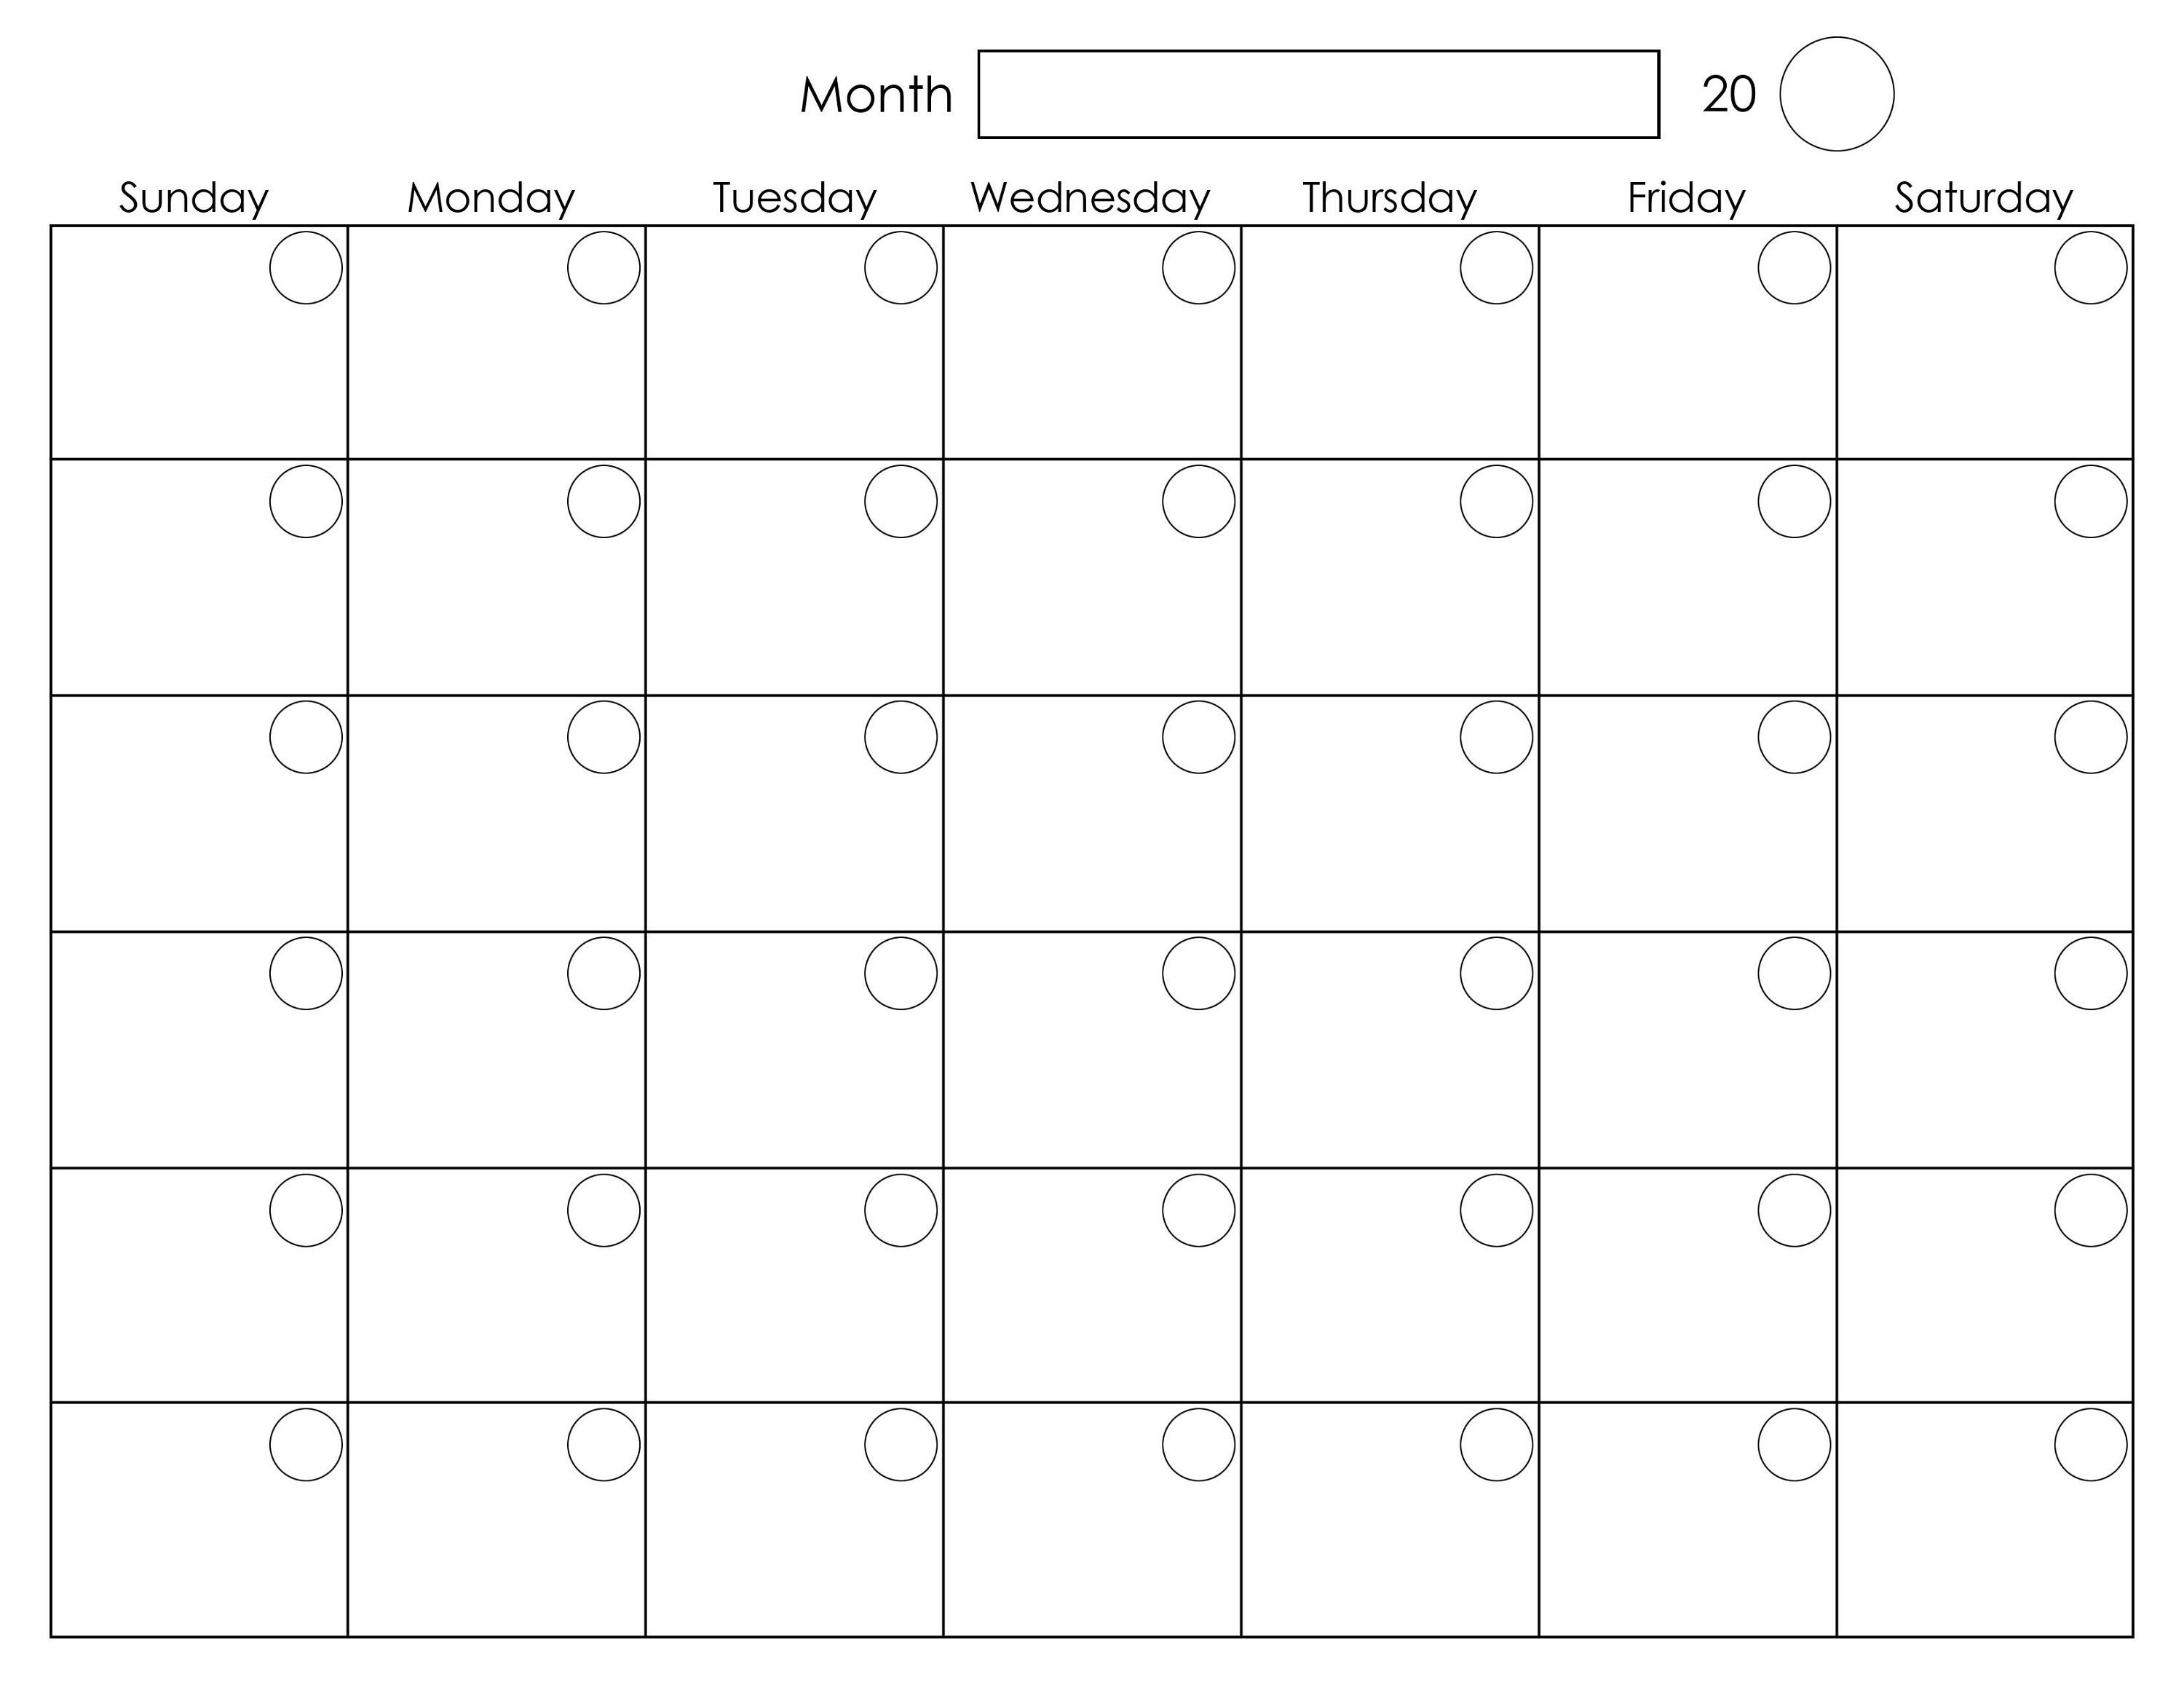 Printable Blank Monthly Calendar | Calendar Template-Images Of Free Printable Calendar Templates For Kids Monday To Friday Only